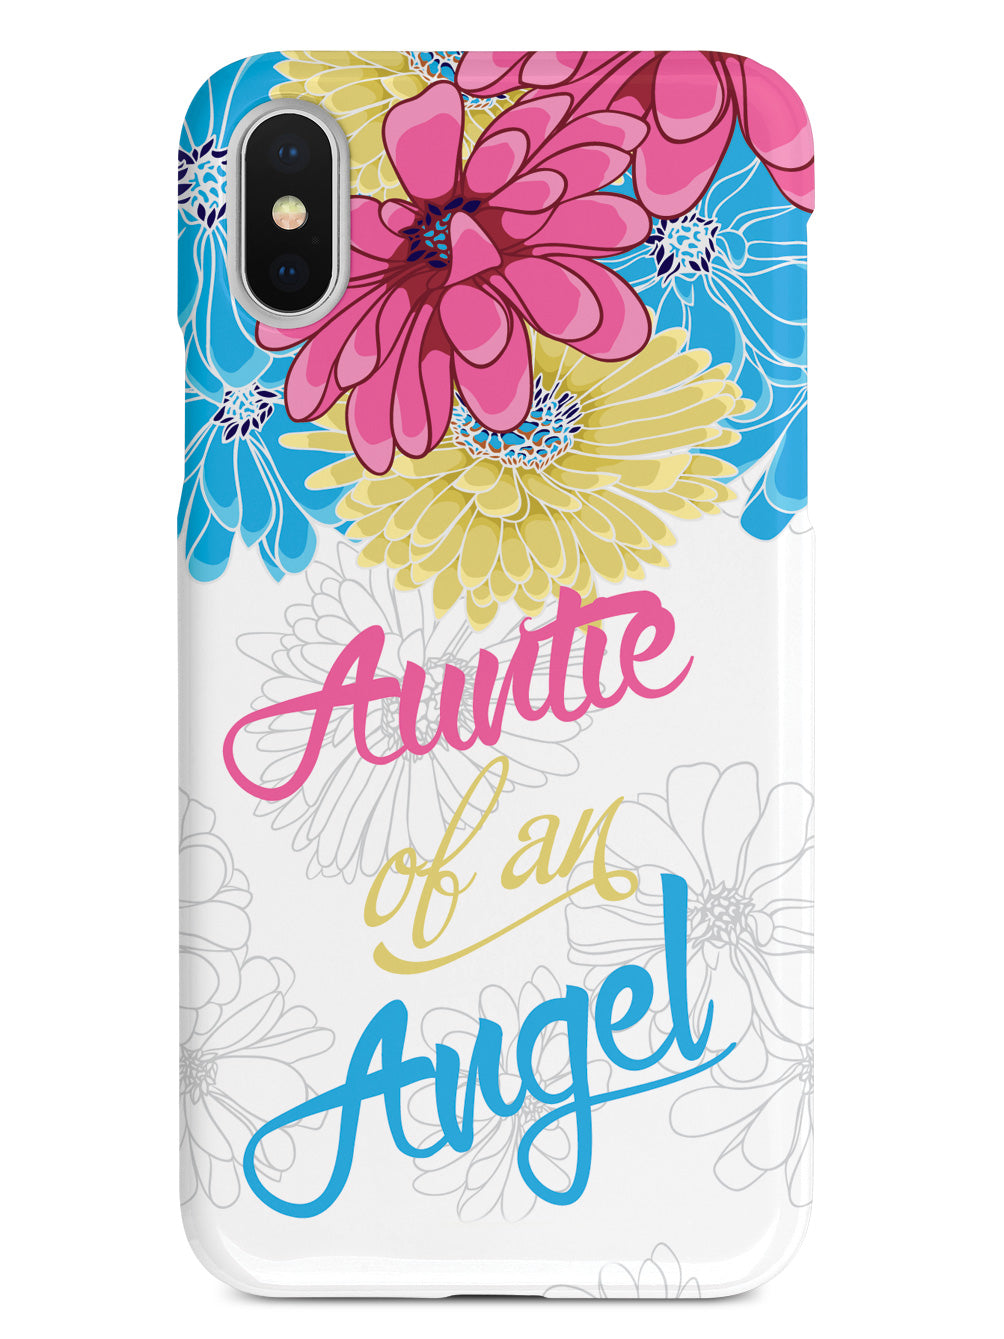 Auntie of an Angel Case